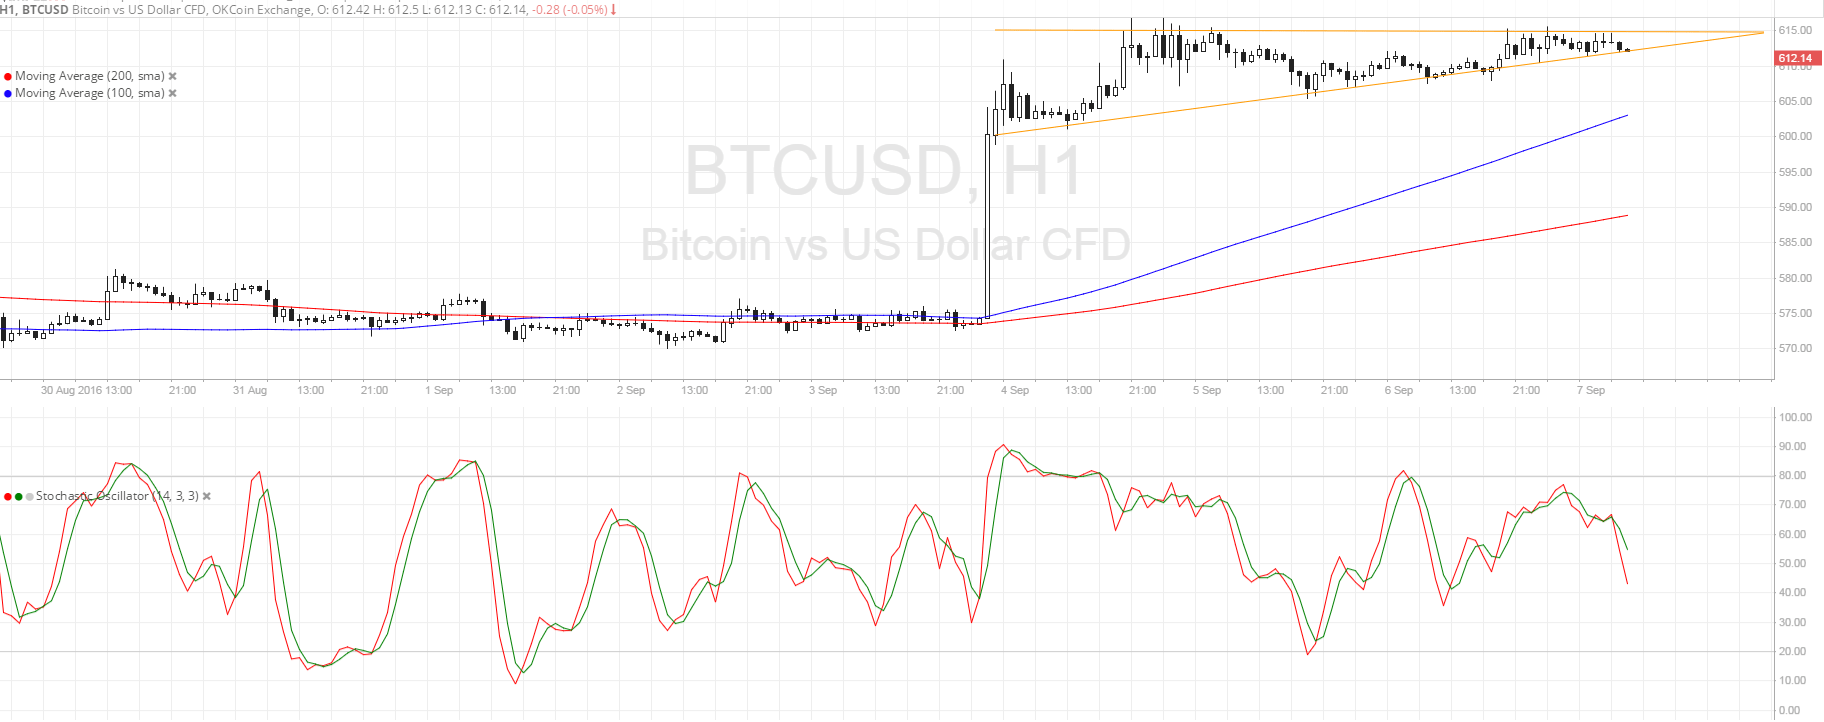 Bitcoin Price Technical Analysis for 09/07/2016 - Which Way to Break Out?